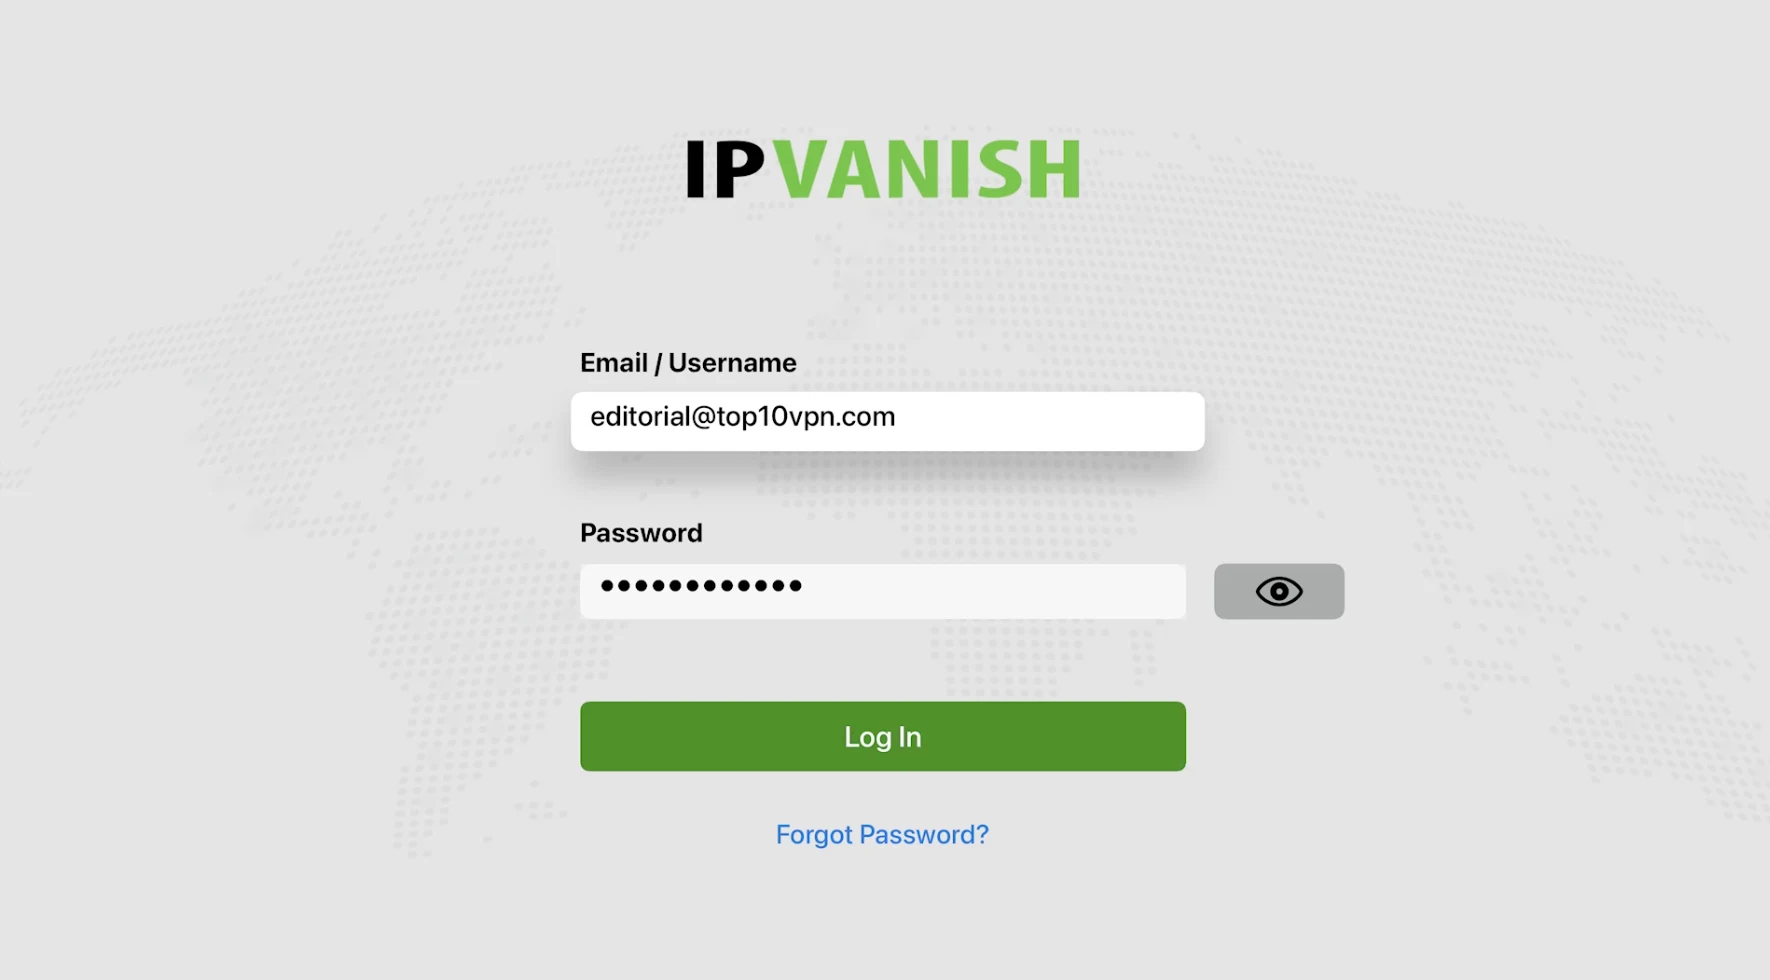 The login screen of the IPVanish tvOS app, with fields for "Email / Username" and "Password". The email "editorial@top10vpn.com" is entered, and the password field is filled with dots for privacy. A green "Log In" button and a "Forgot Password?" link are also shown.